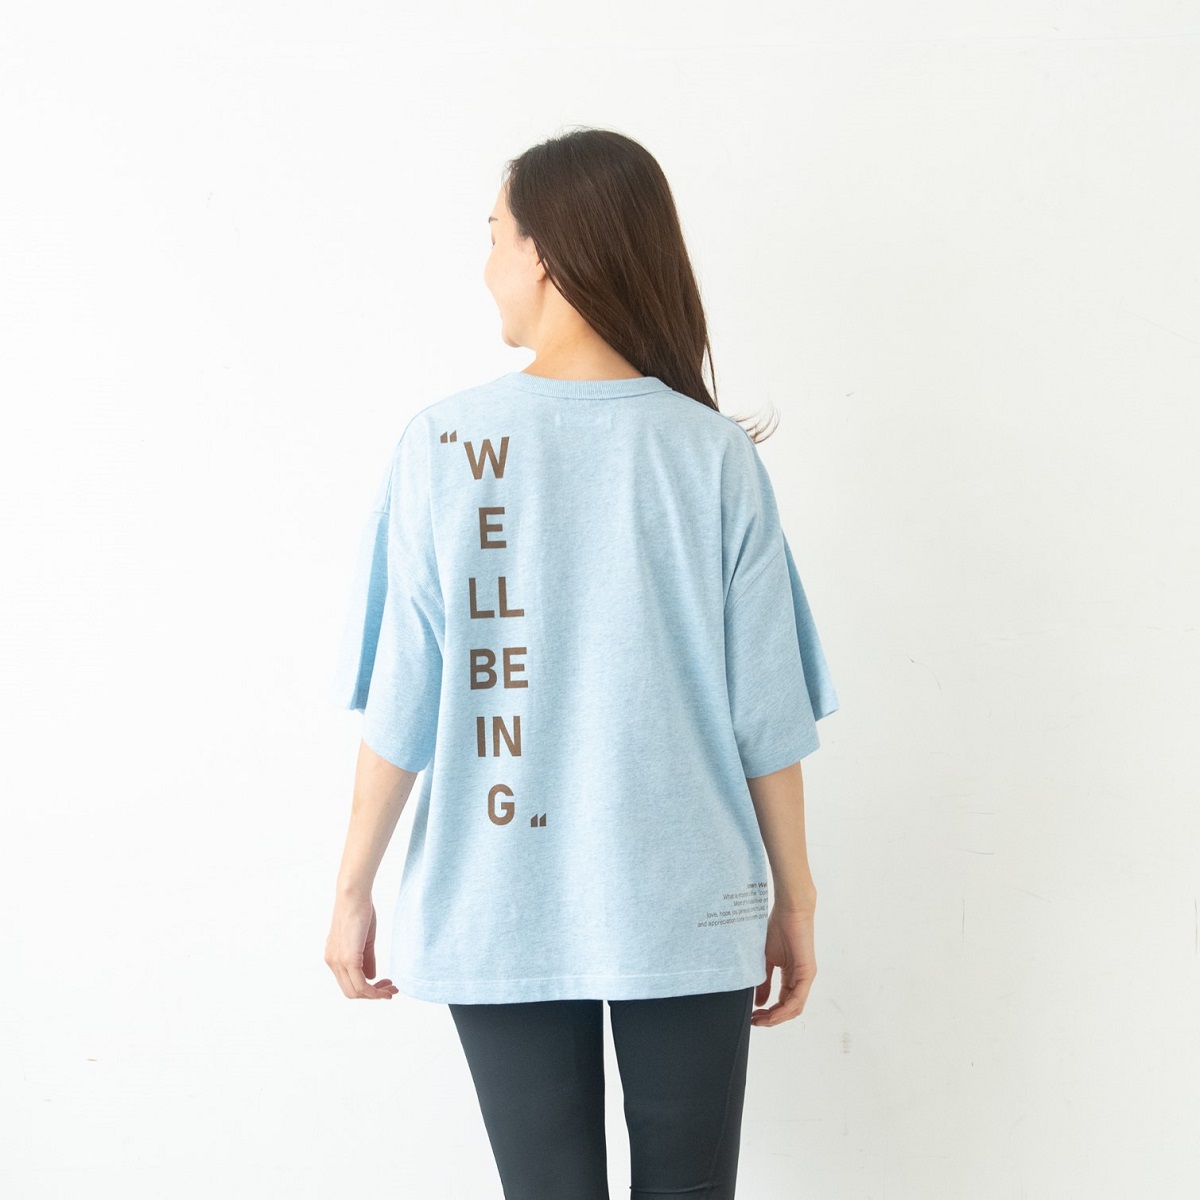 Well-being　リカバーTシャツ ライトブルー ＸＬ